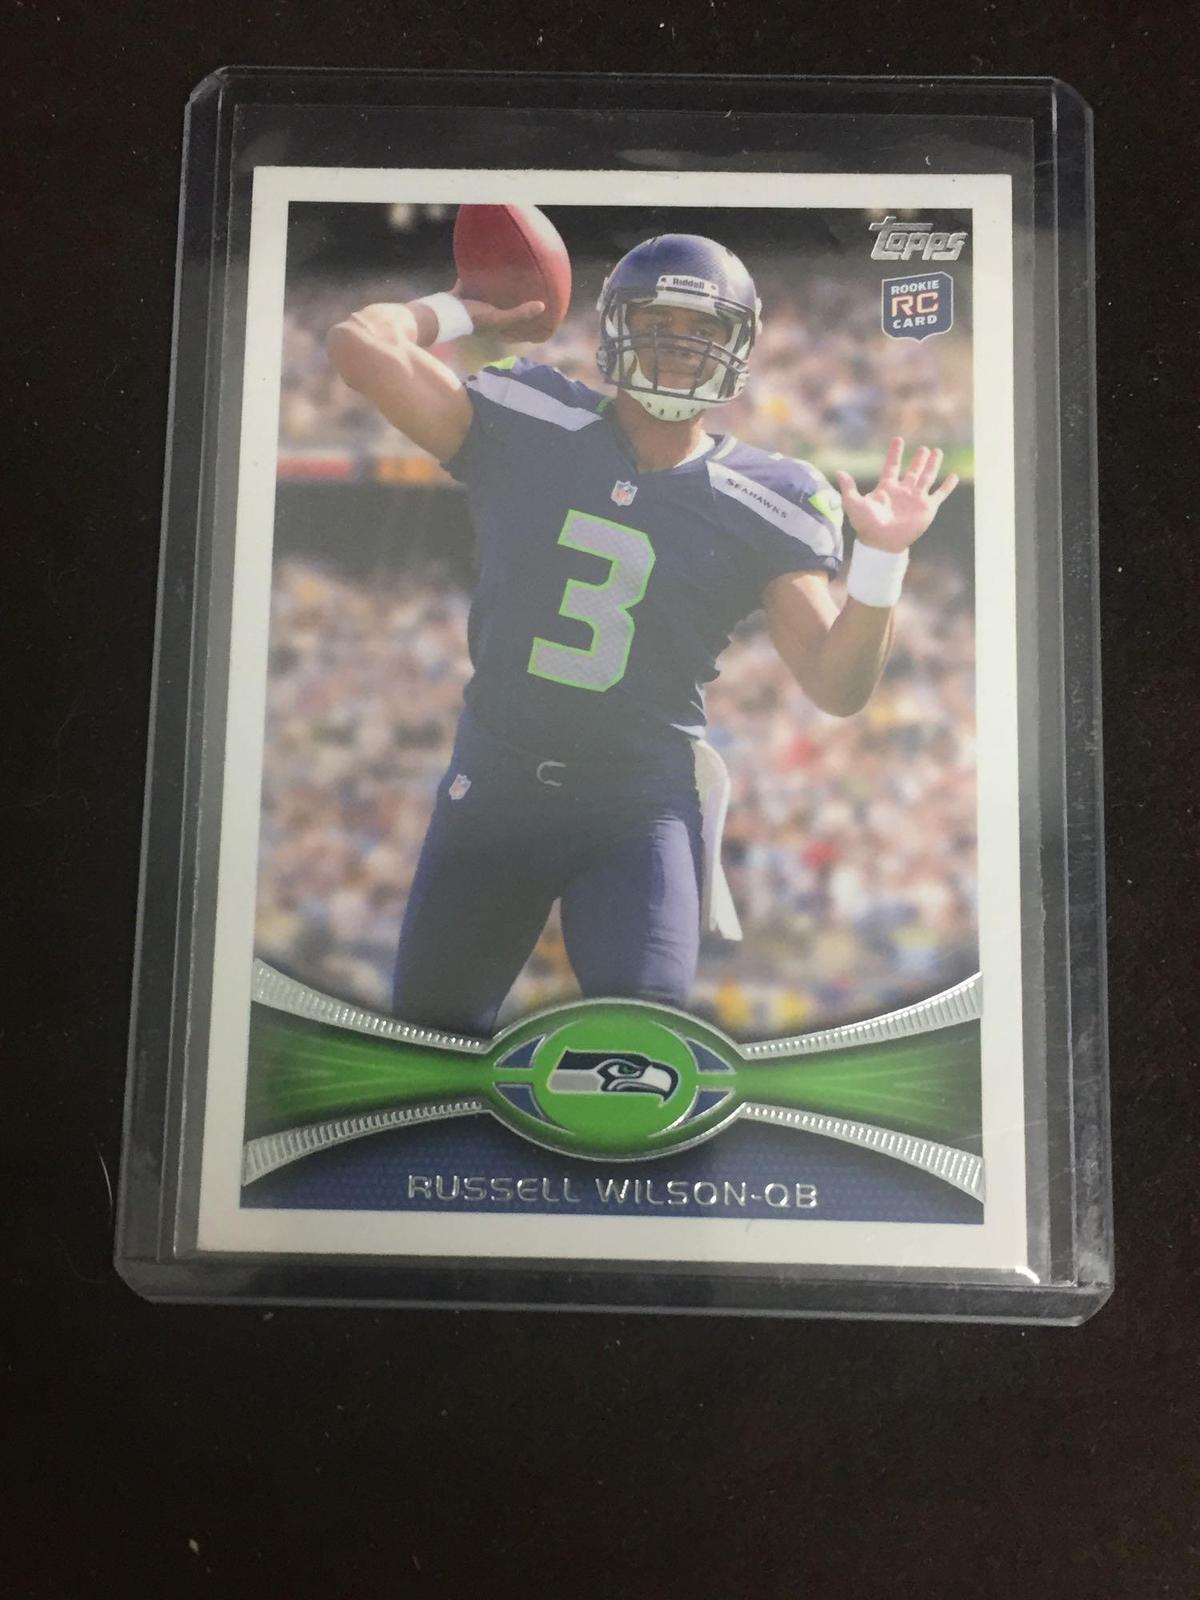 2012 Topps #165 Russell Wilson Seahawks Rookie Football Card from Collection